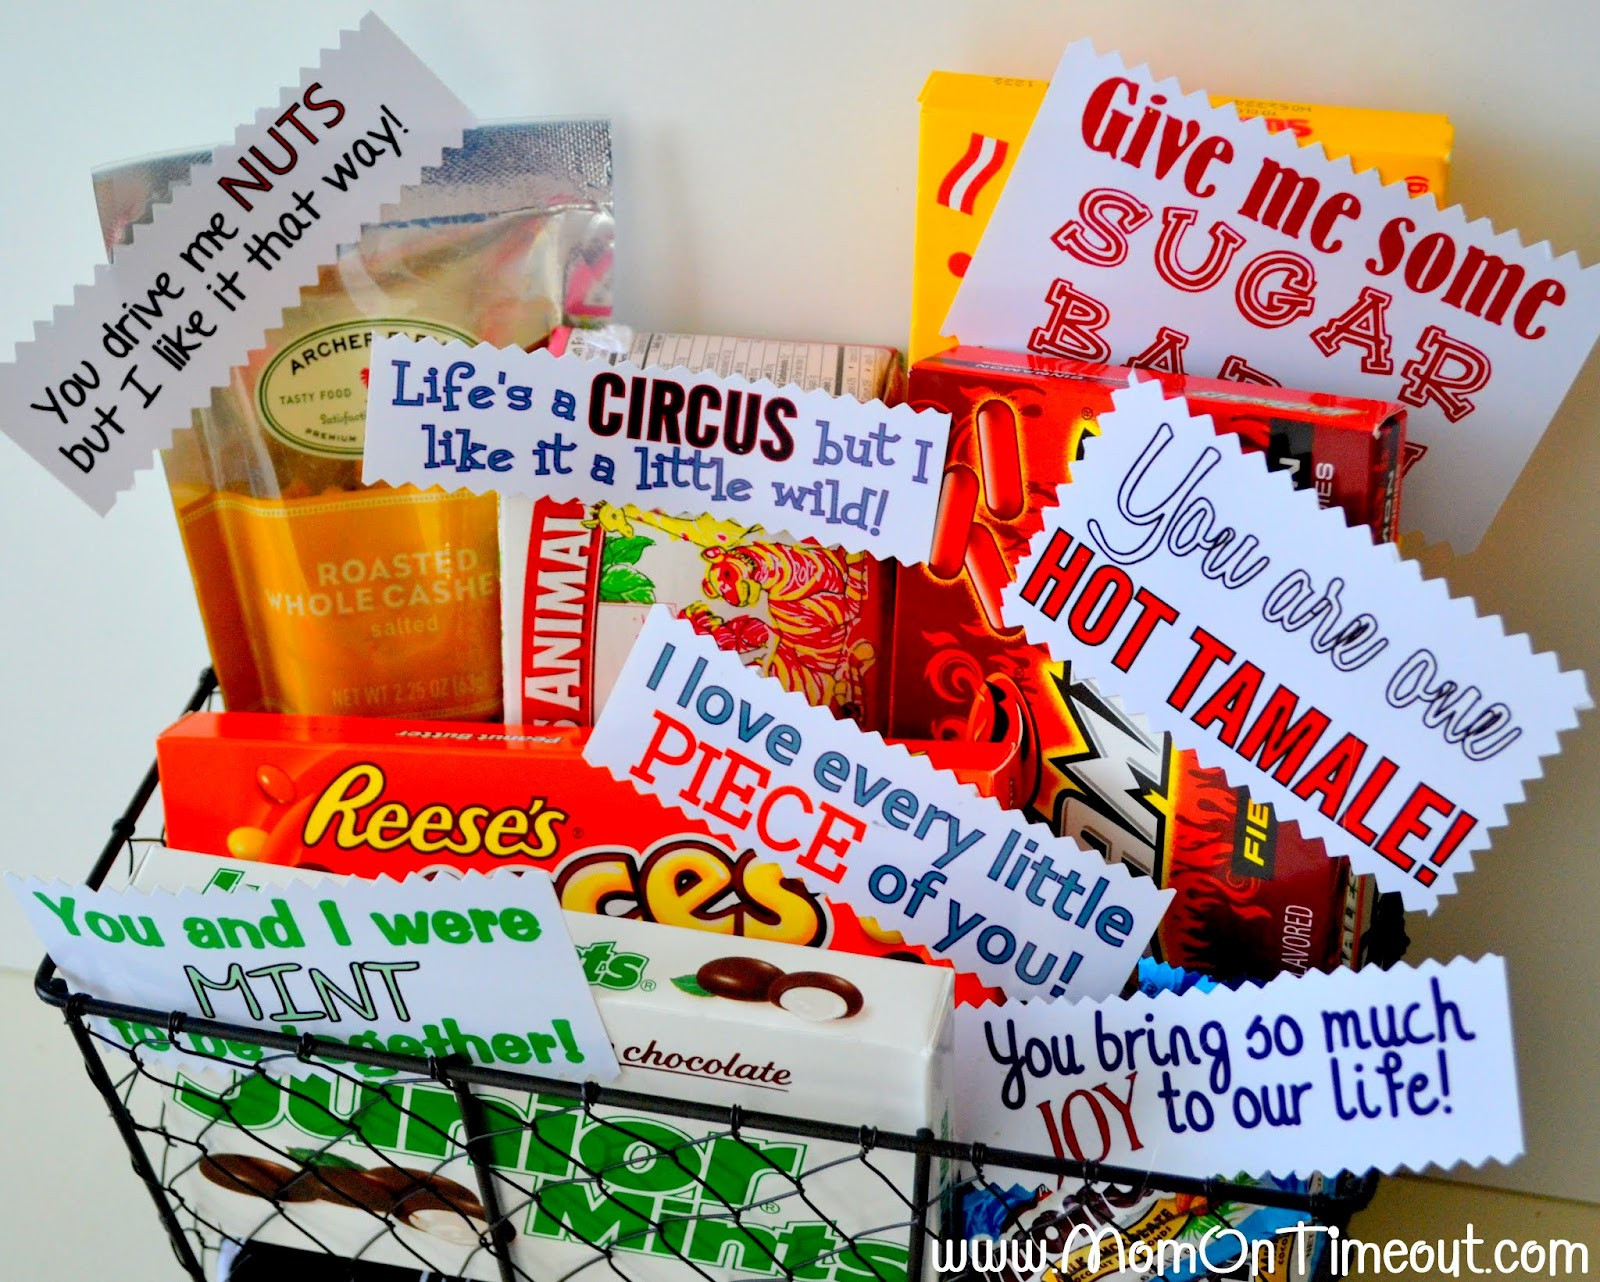 Valentines Day Gift Ideas For Him
 DIY Valentine s Day Gift Baskets For Him Darling Doodles